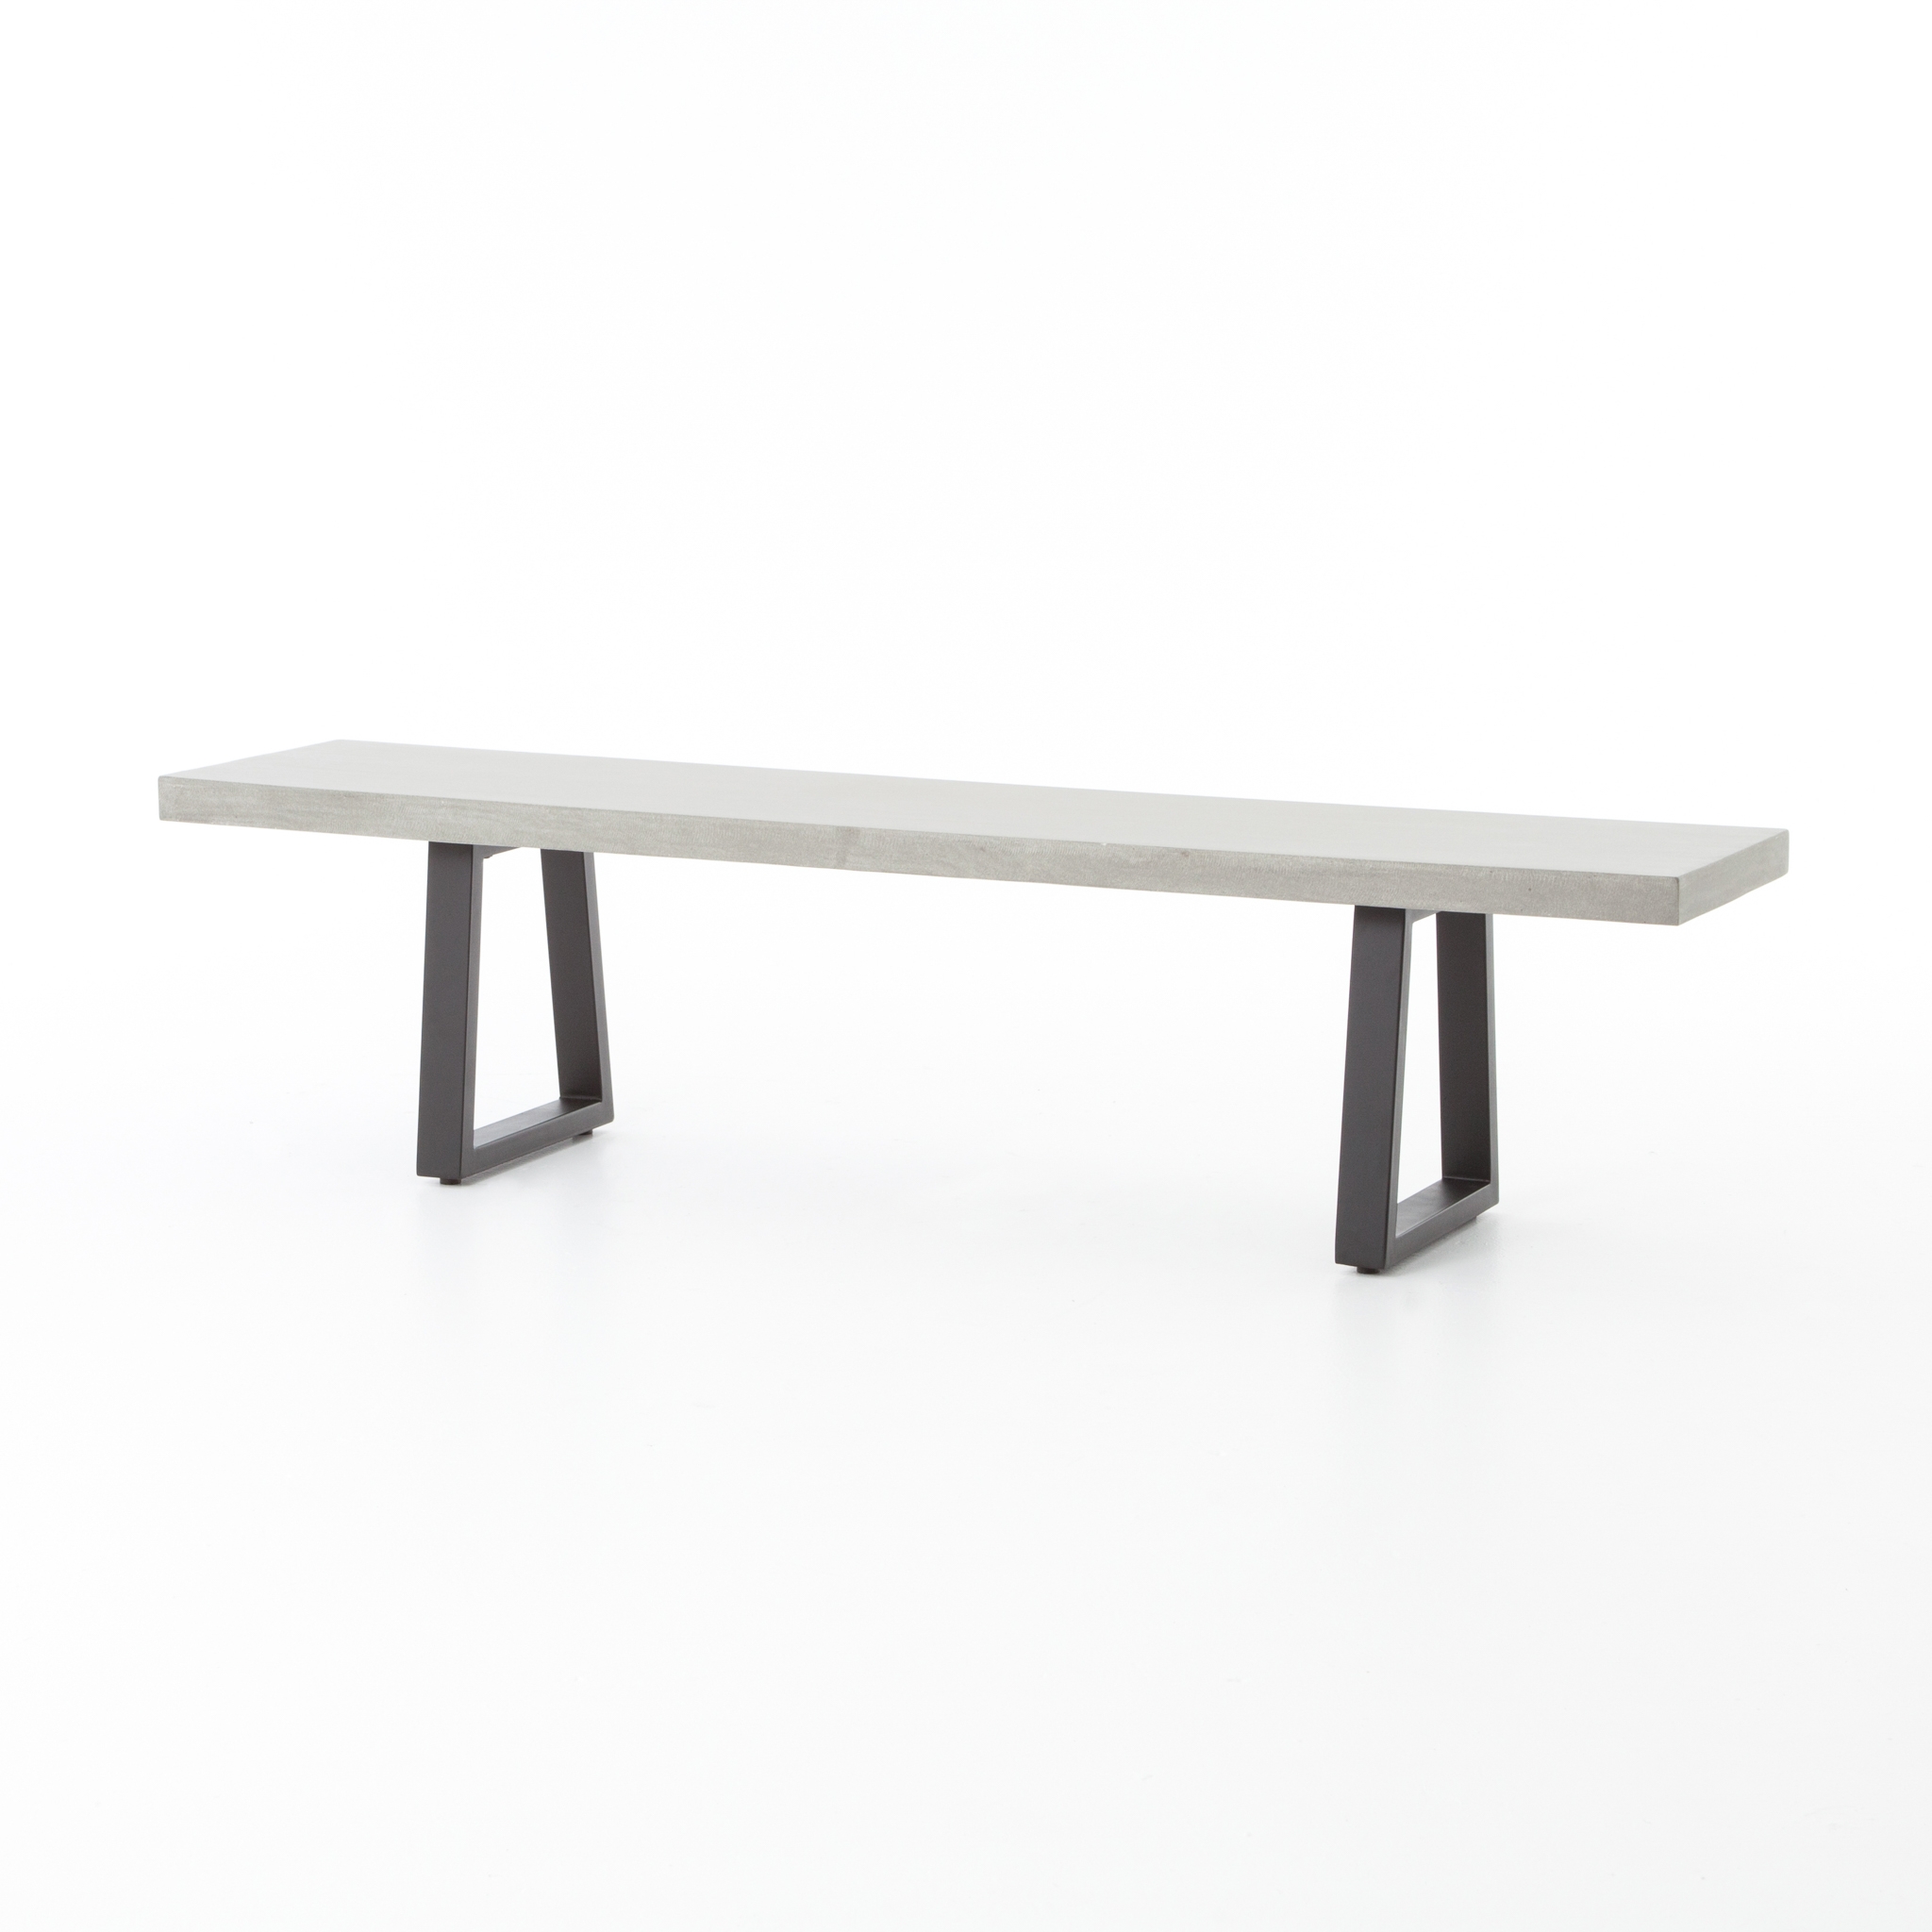 Cyrus Outdoor Dining Bench 73"